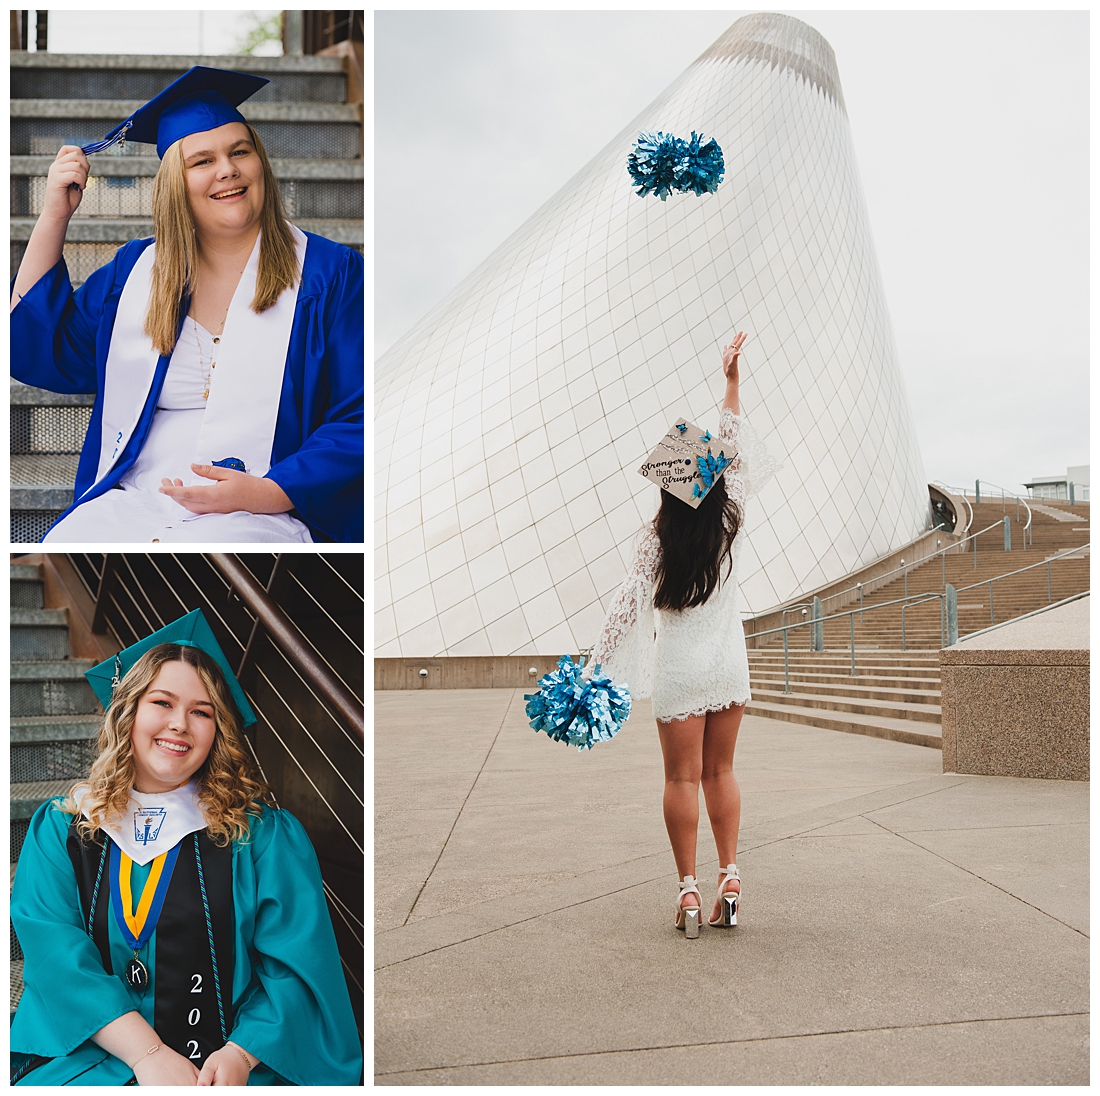 Teens in Cap and Gowns for Graduation | Tacoma Museum of Glass Graduation Portraits | Photographed by Tacoma Senior Photographer Amanda Howse | Teen Wise Guest Blog Post